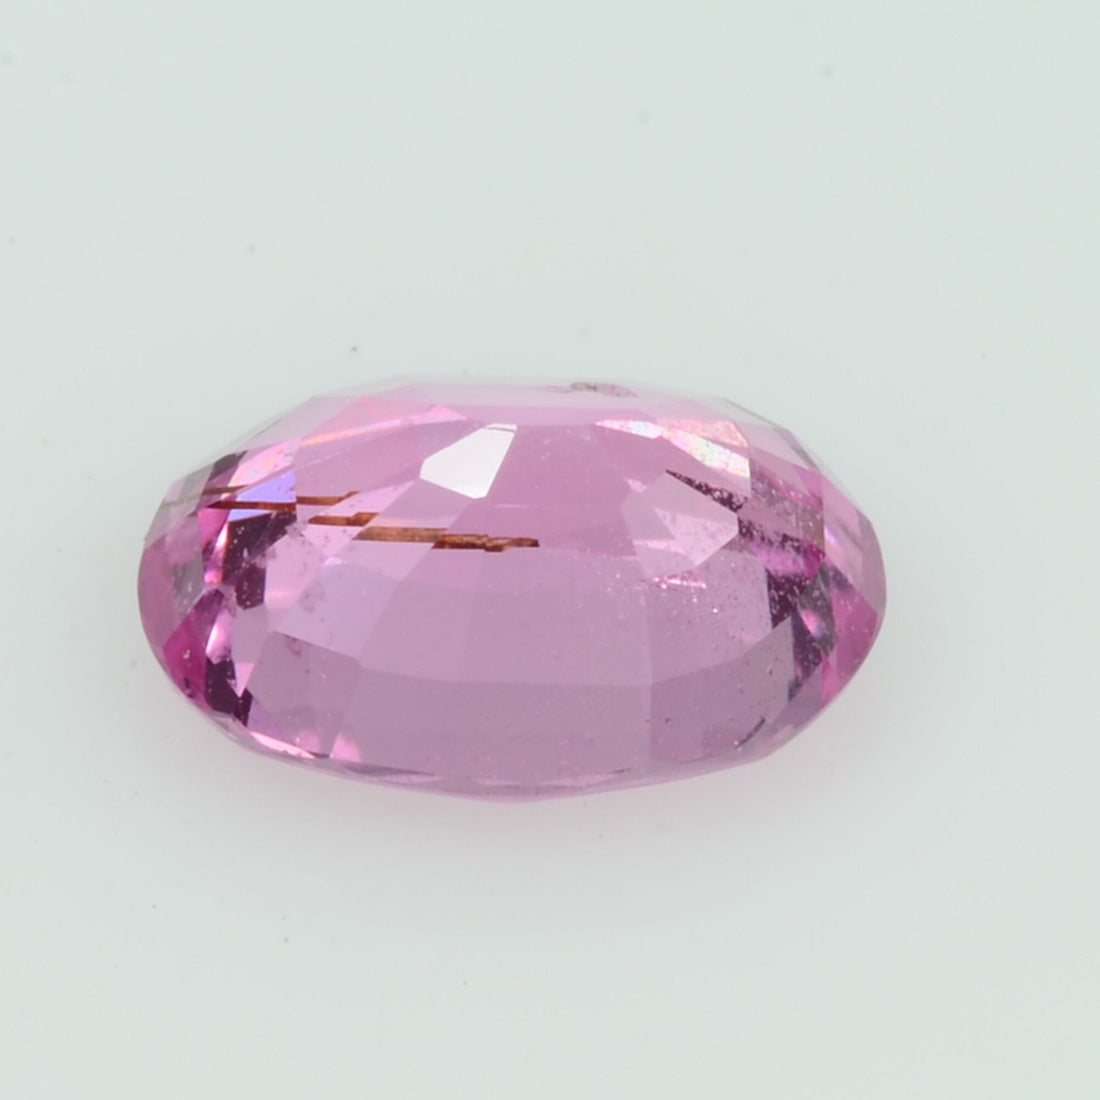 1.63 cts Natural Pink Sapphire Loose Gemstone Oval Cut